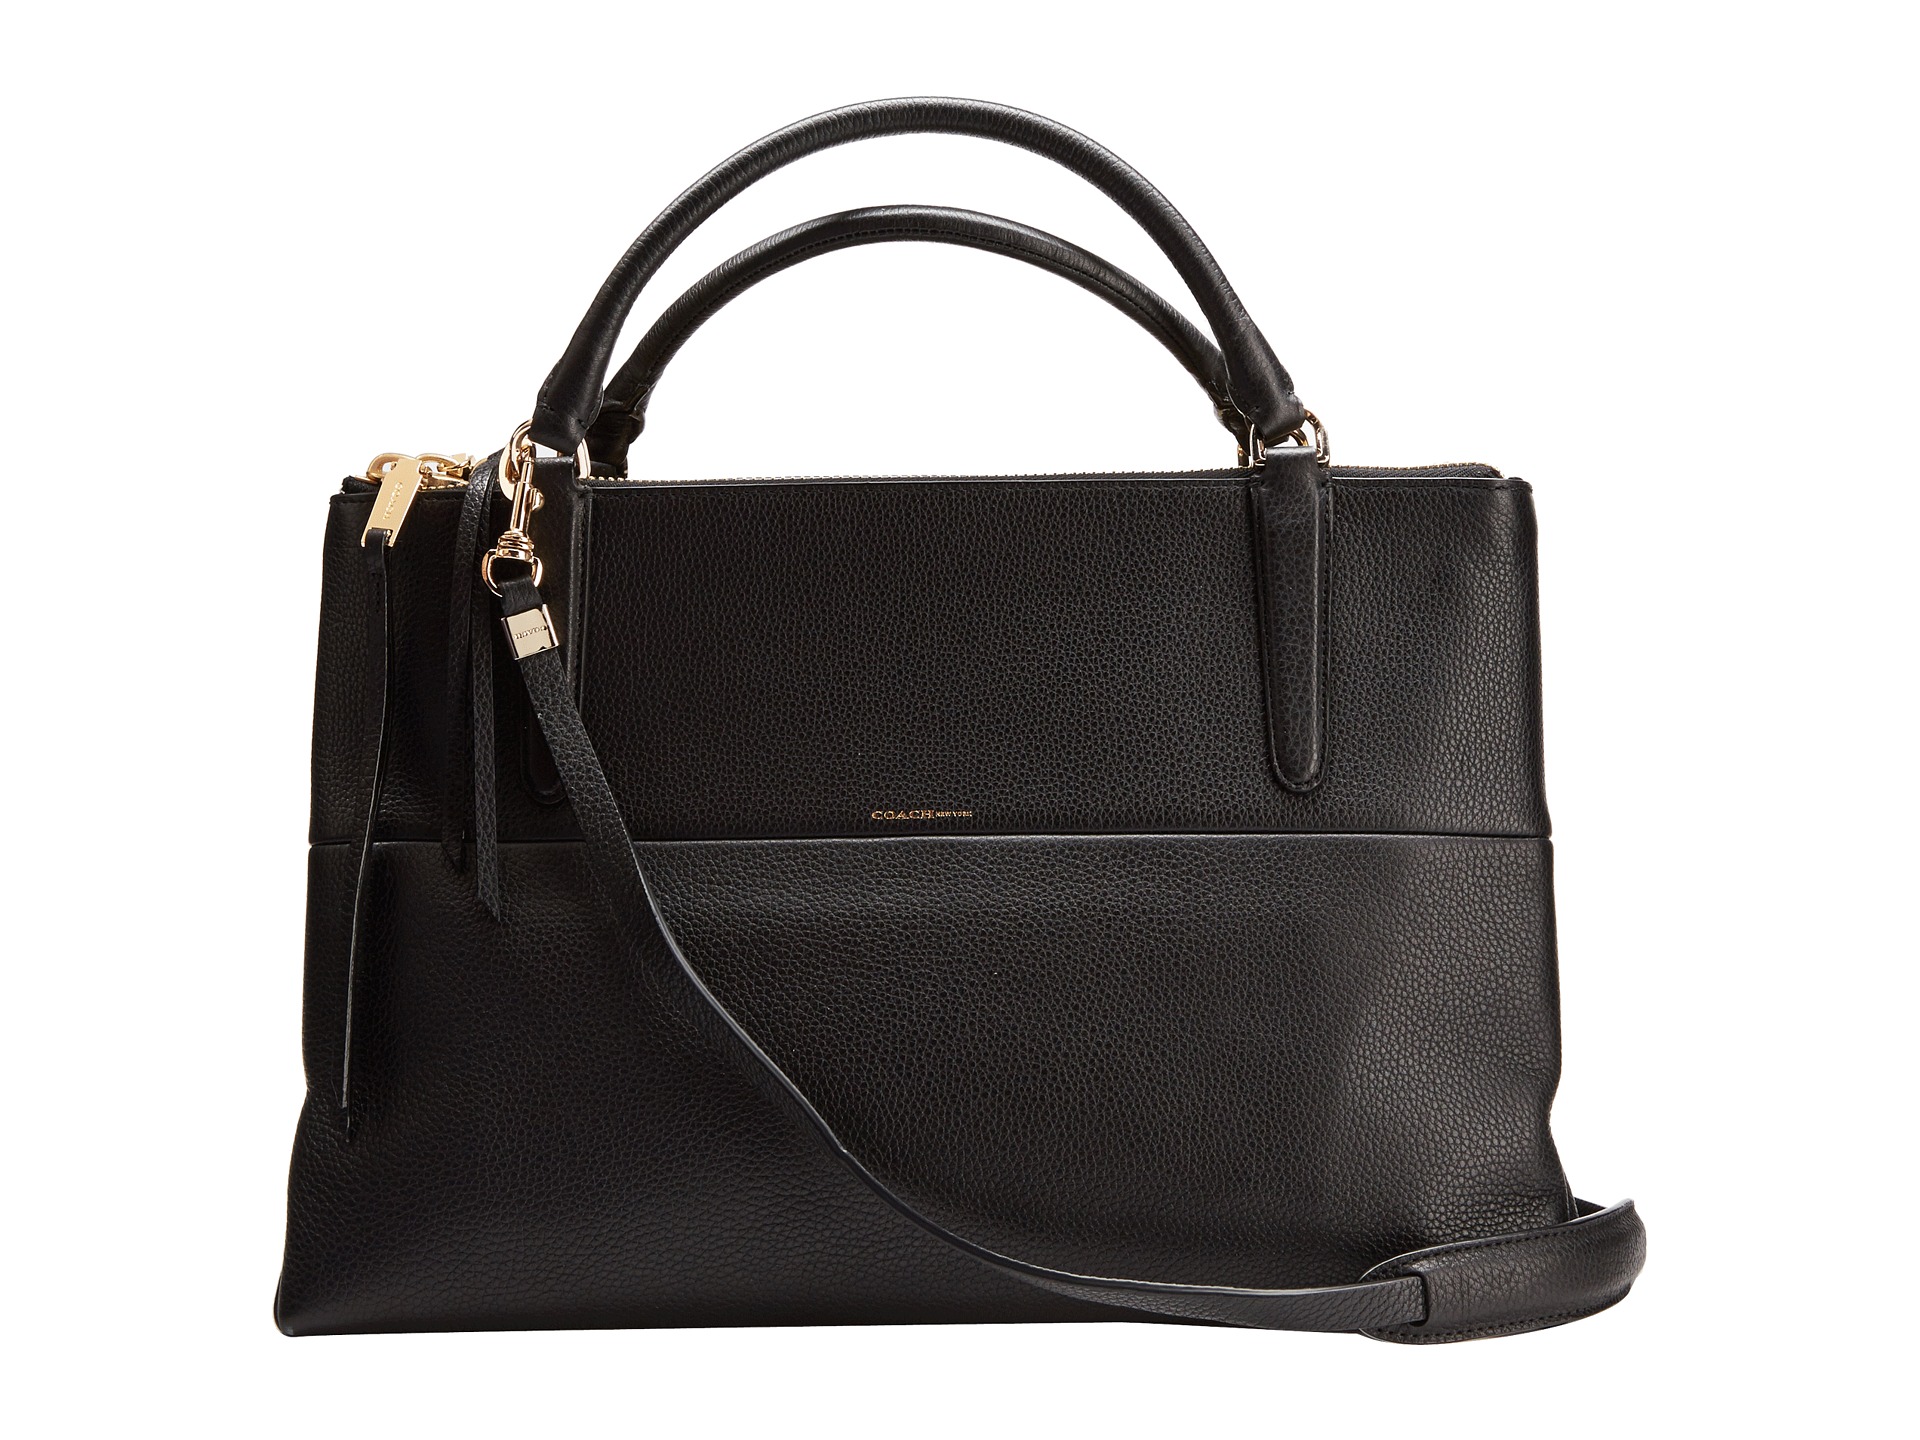 Coach The Borough Bag Pebbled Leather | Shipped Free at Zappos